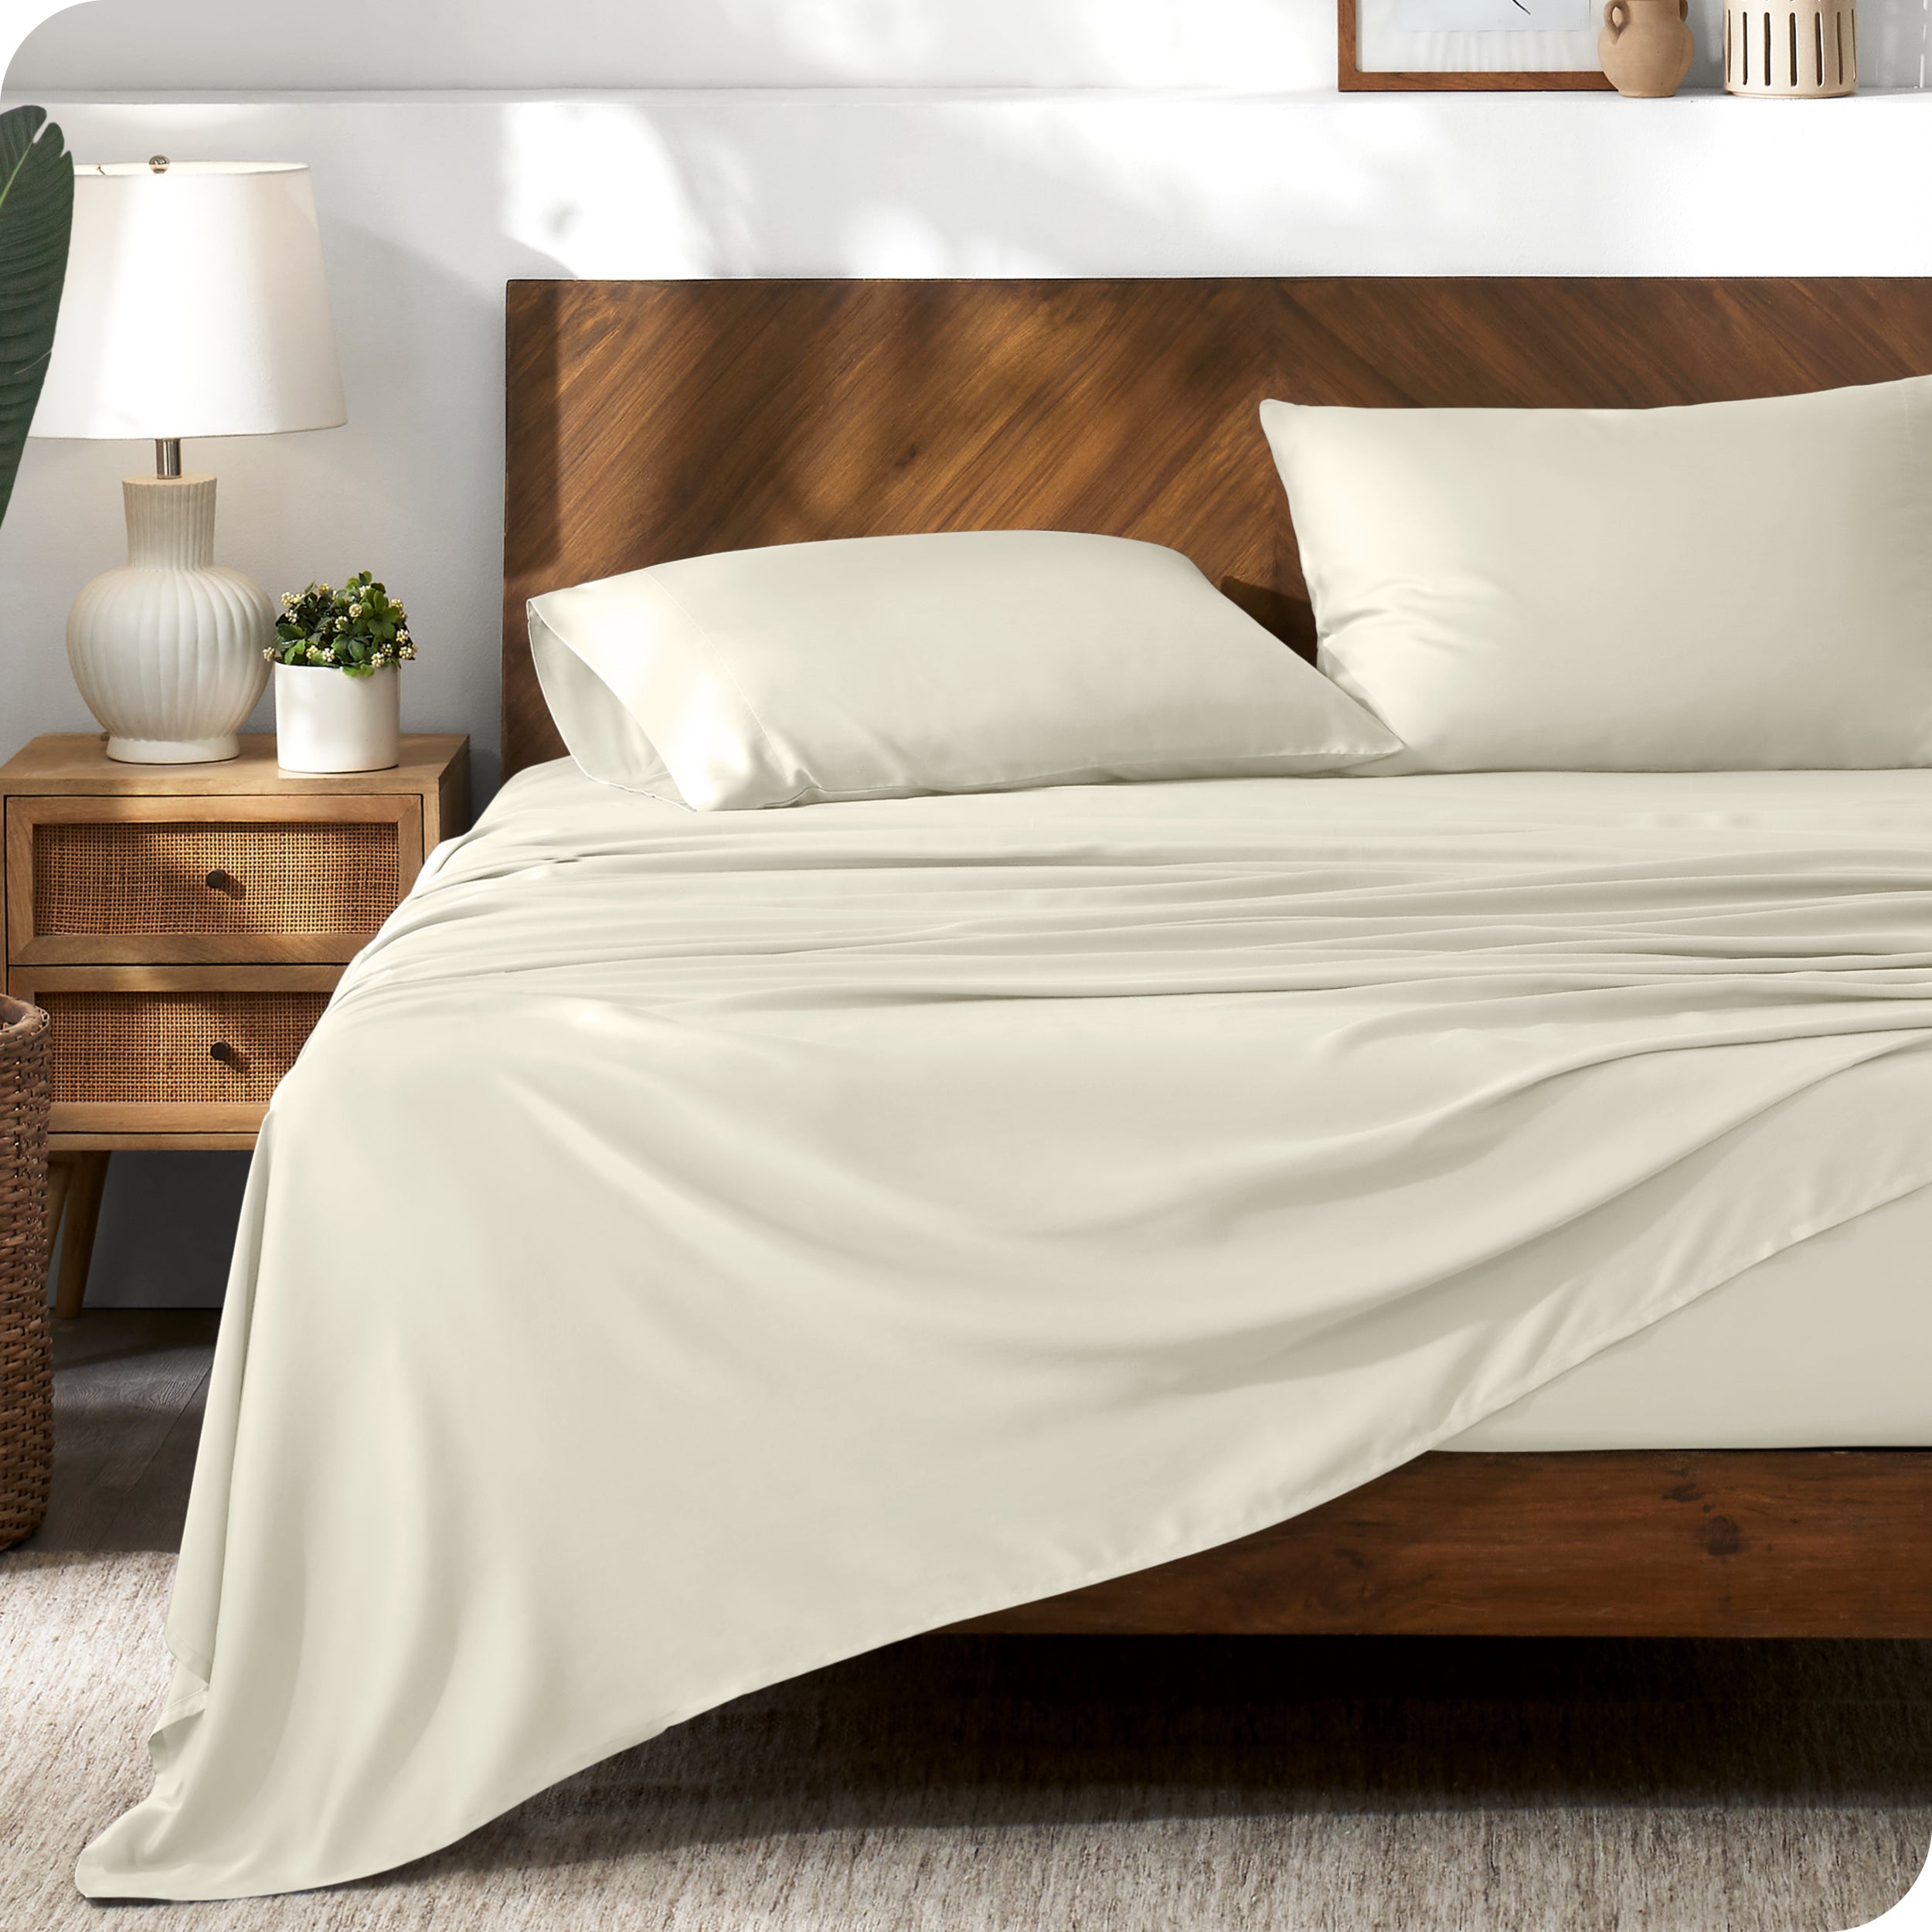 TENCEL™ sheet set on a bed. The flat sheet is draped over the side and end of the bed.